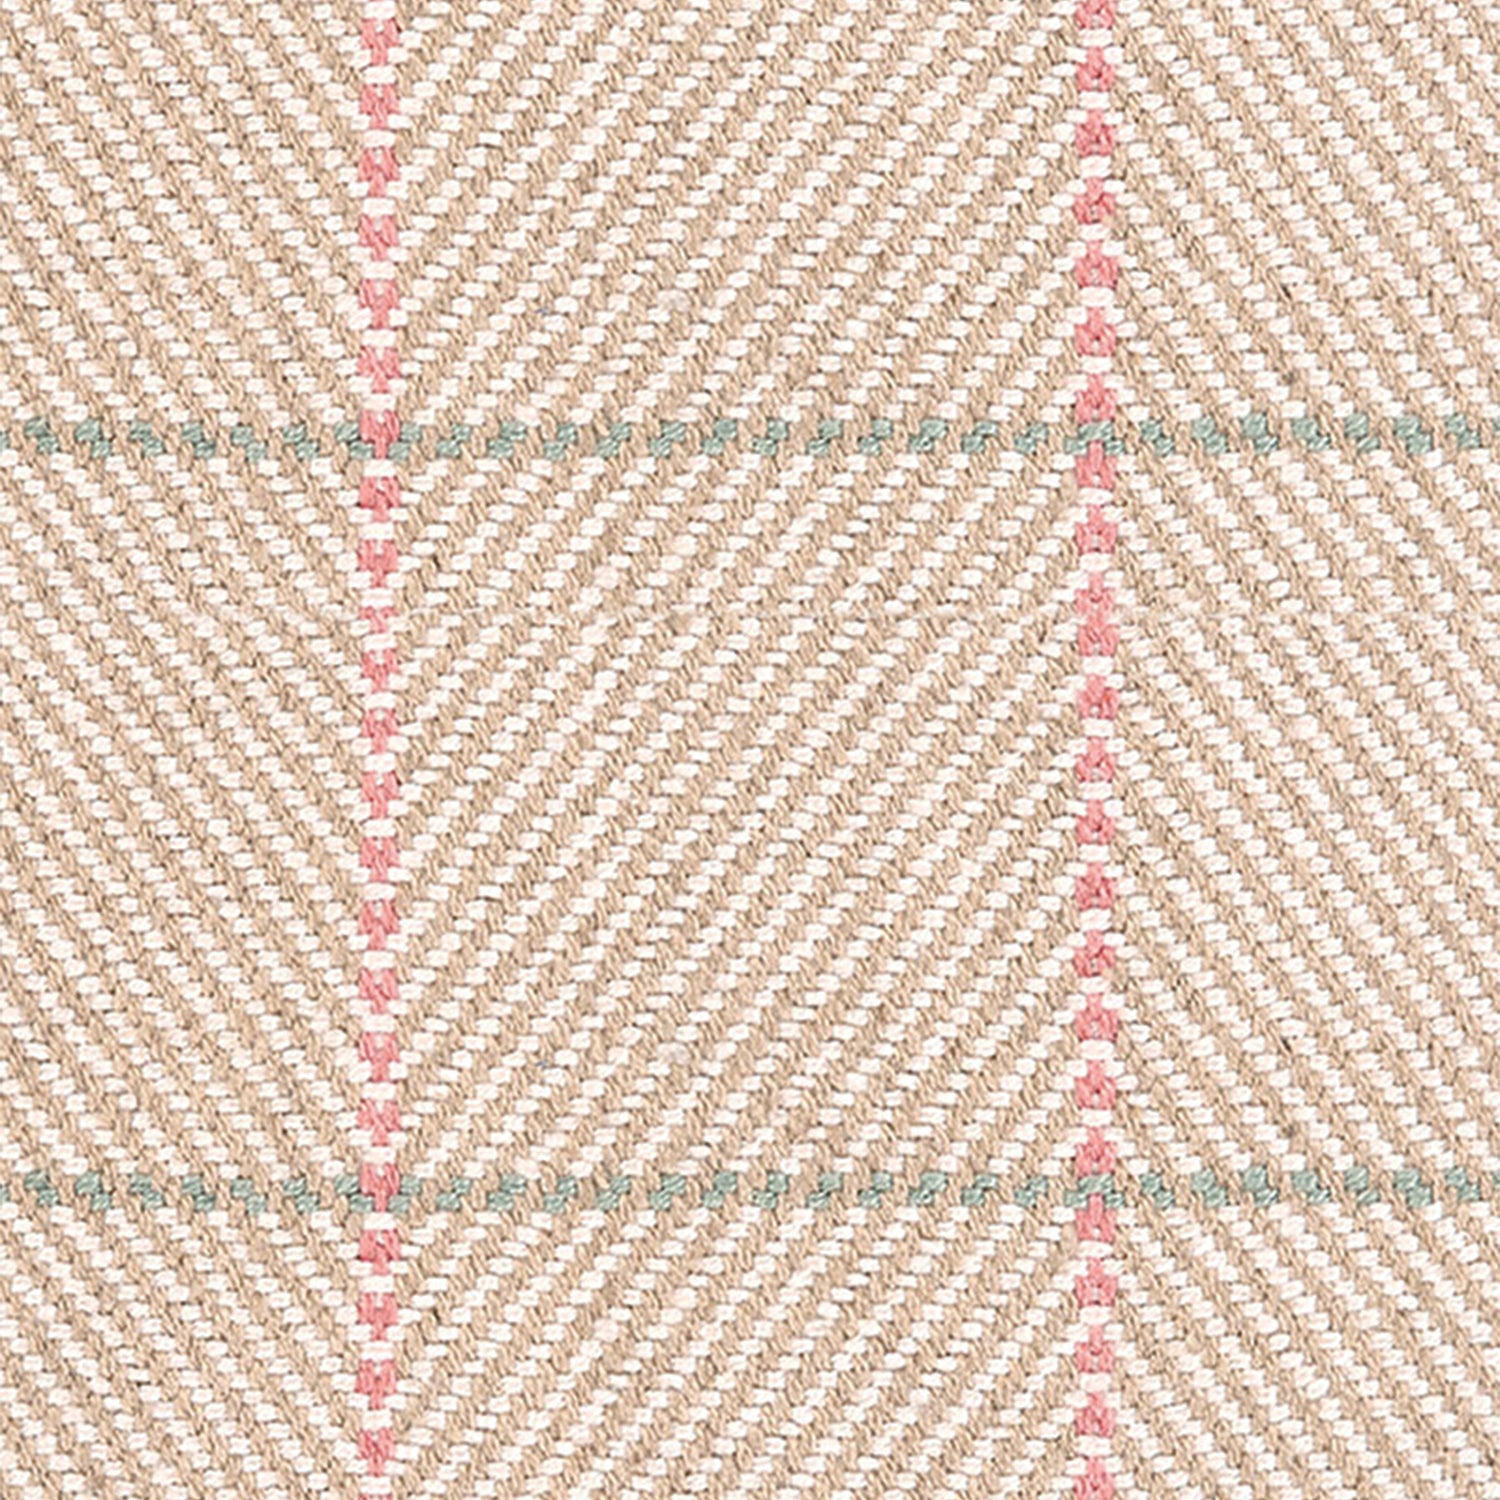 Outdoor broadloom carpet swatch in a plaid weave in shades of white, tan, pink and sage.